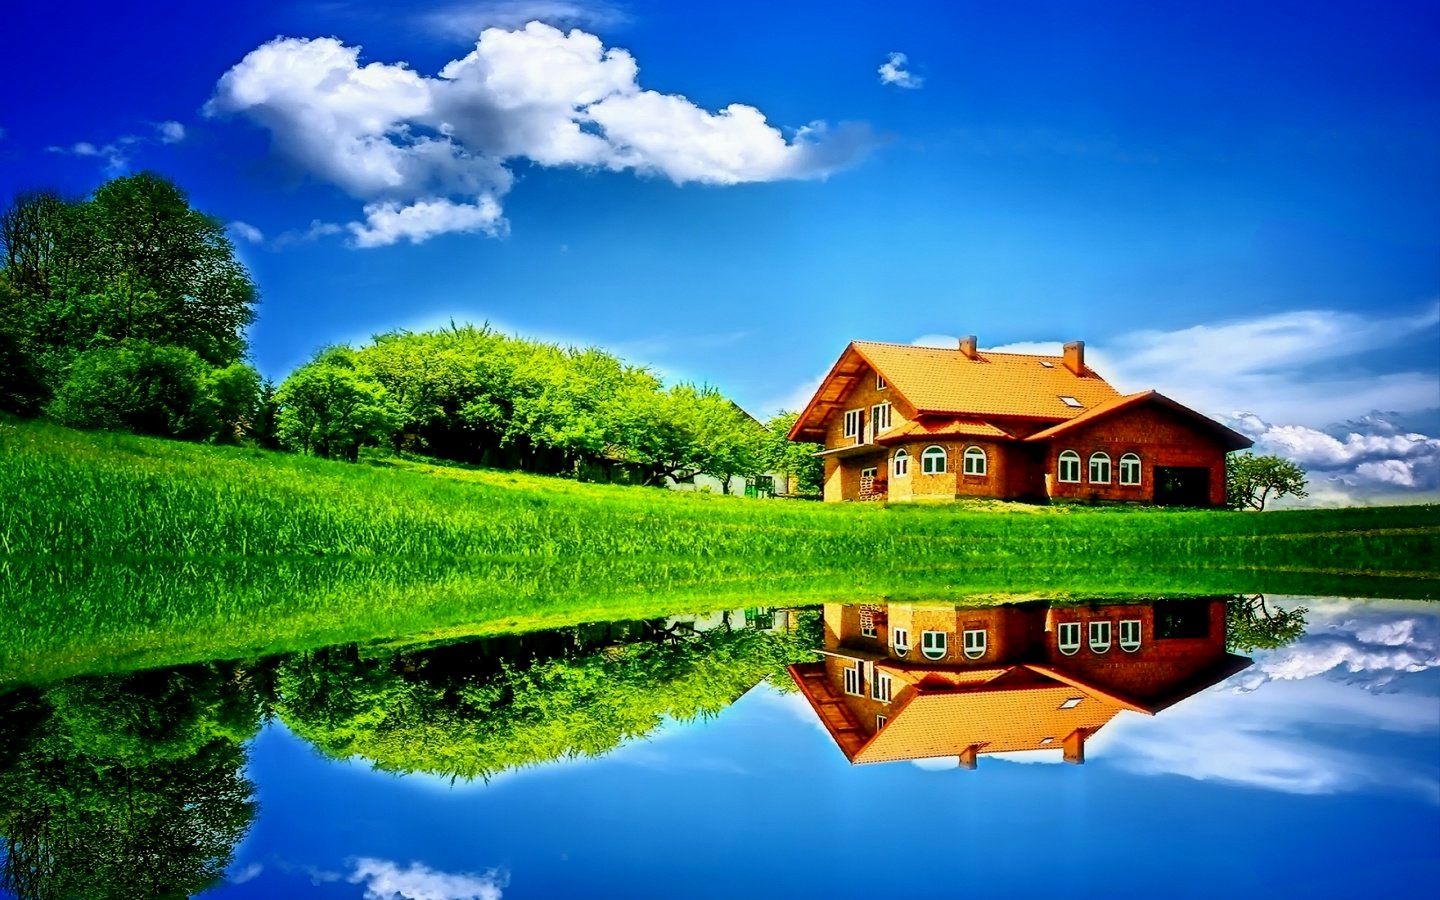 Dream House Wallpaper - Super Hd Images Of Nature , HD Wallpaper & Backgrounds